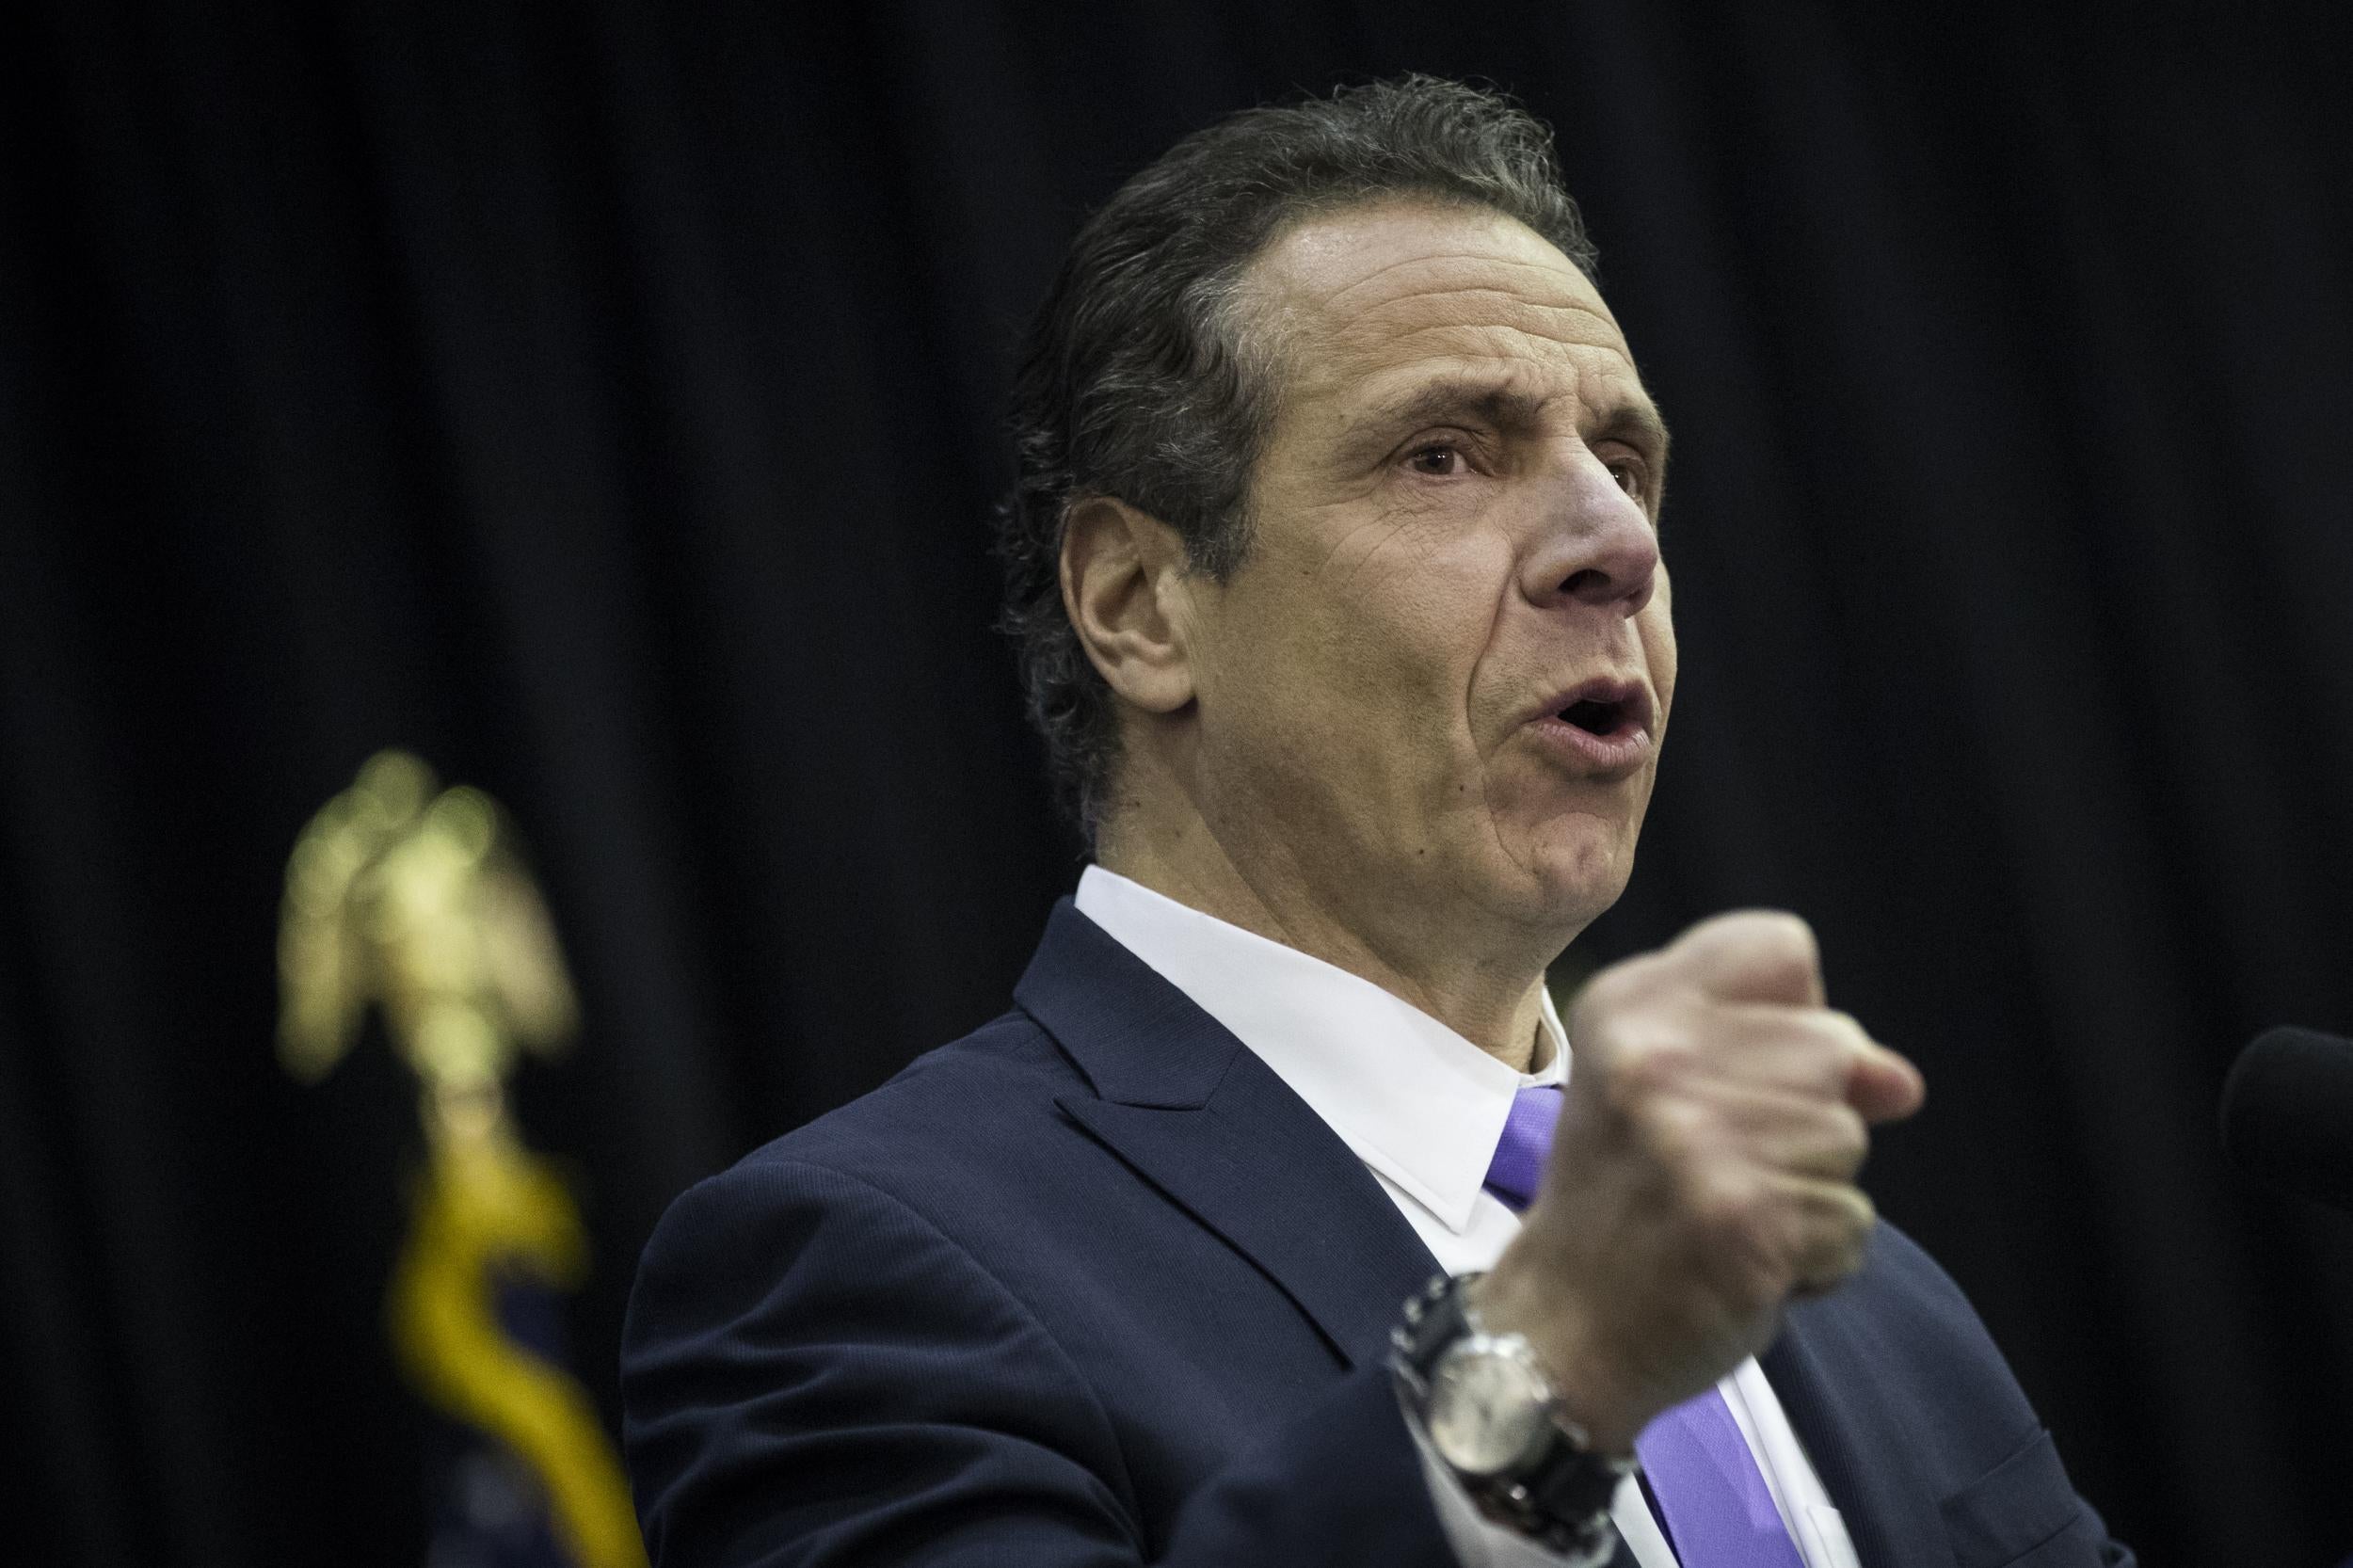 New York Governor Andrew Cuomo speaks during a bill signing event at John Jay College